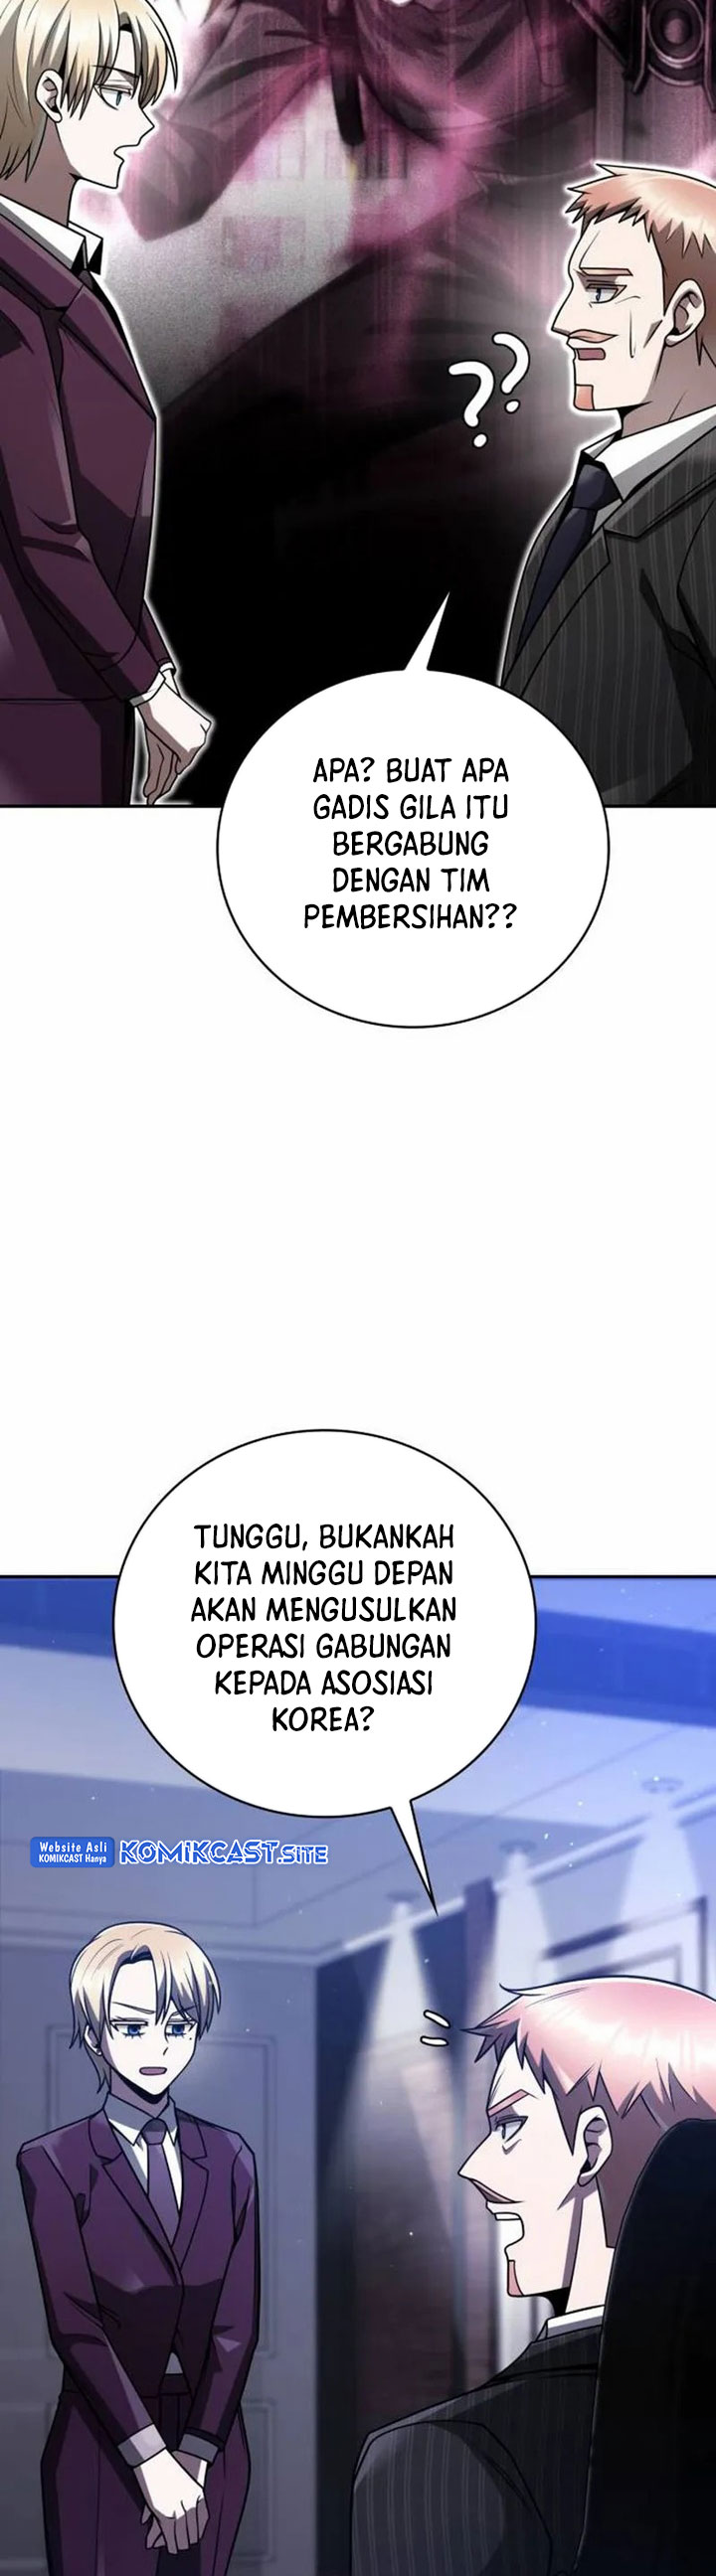 Dilarang COPAS - situs resmi www.mangacanblog.com - Komik clever cleaning life of the returned genius hunter 032 - chapter 32 33 Indonesia clever cleaning life of the returned genius hunter 032 - chapter 32 Terbaru 39|Baca Manga Komik Indonesia|Mangacan